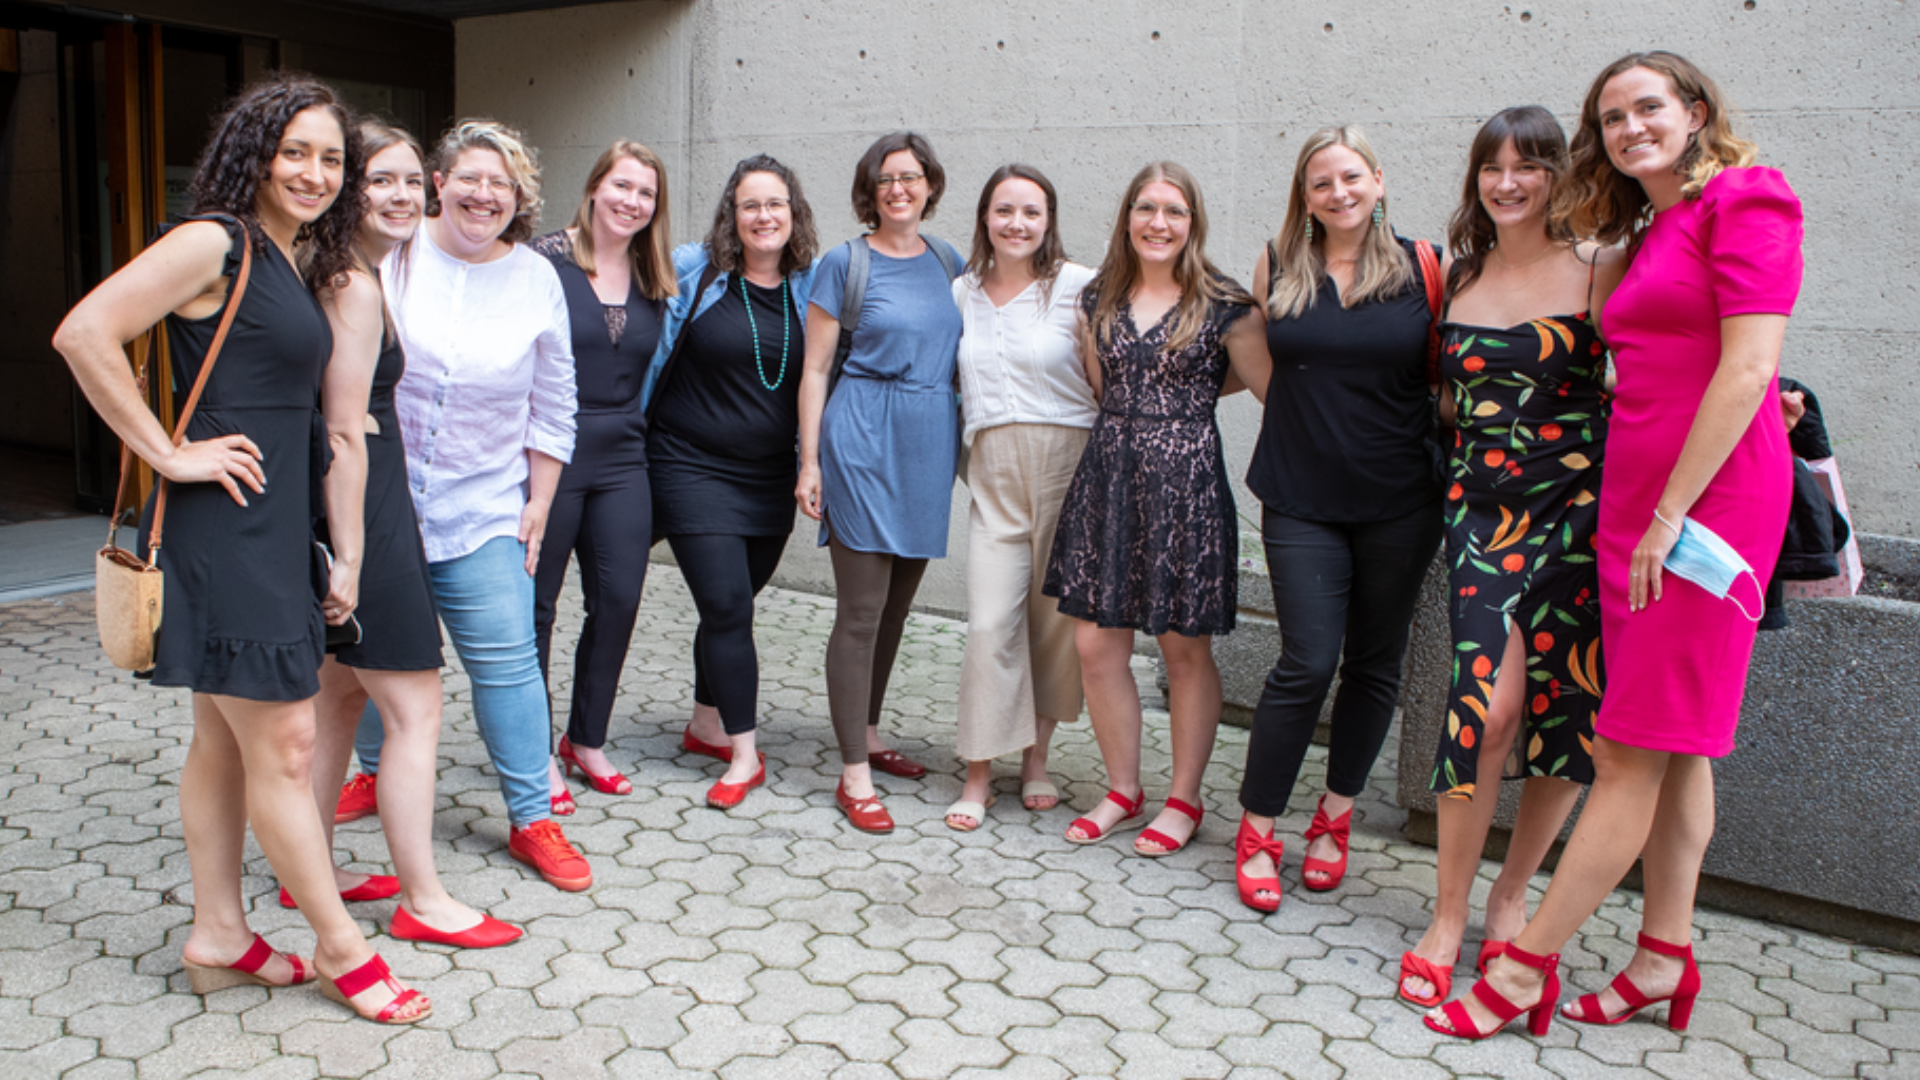 A group of midwives with red shoes on pose for a picture